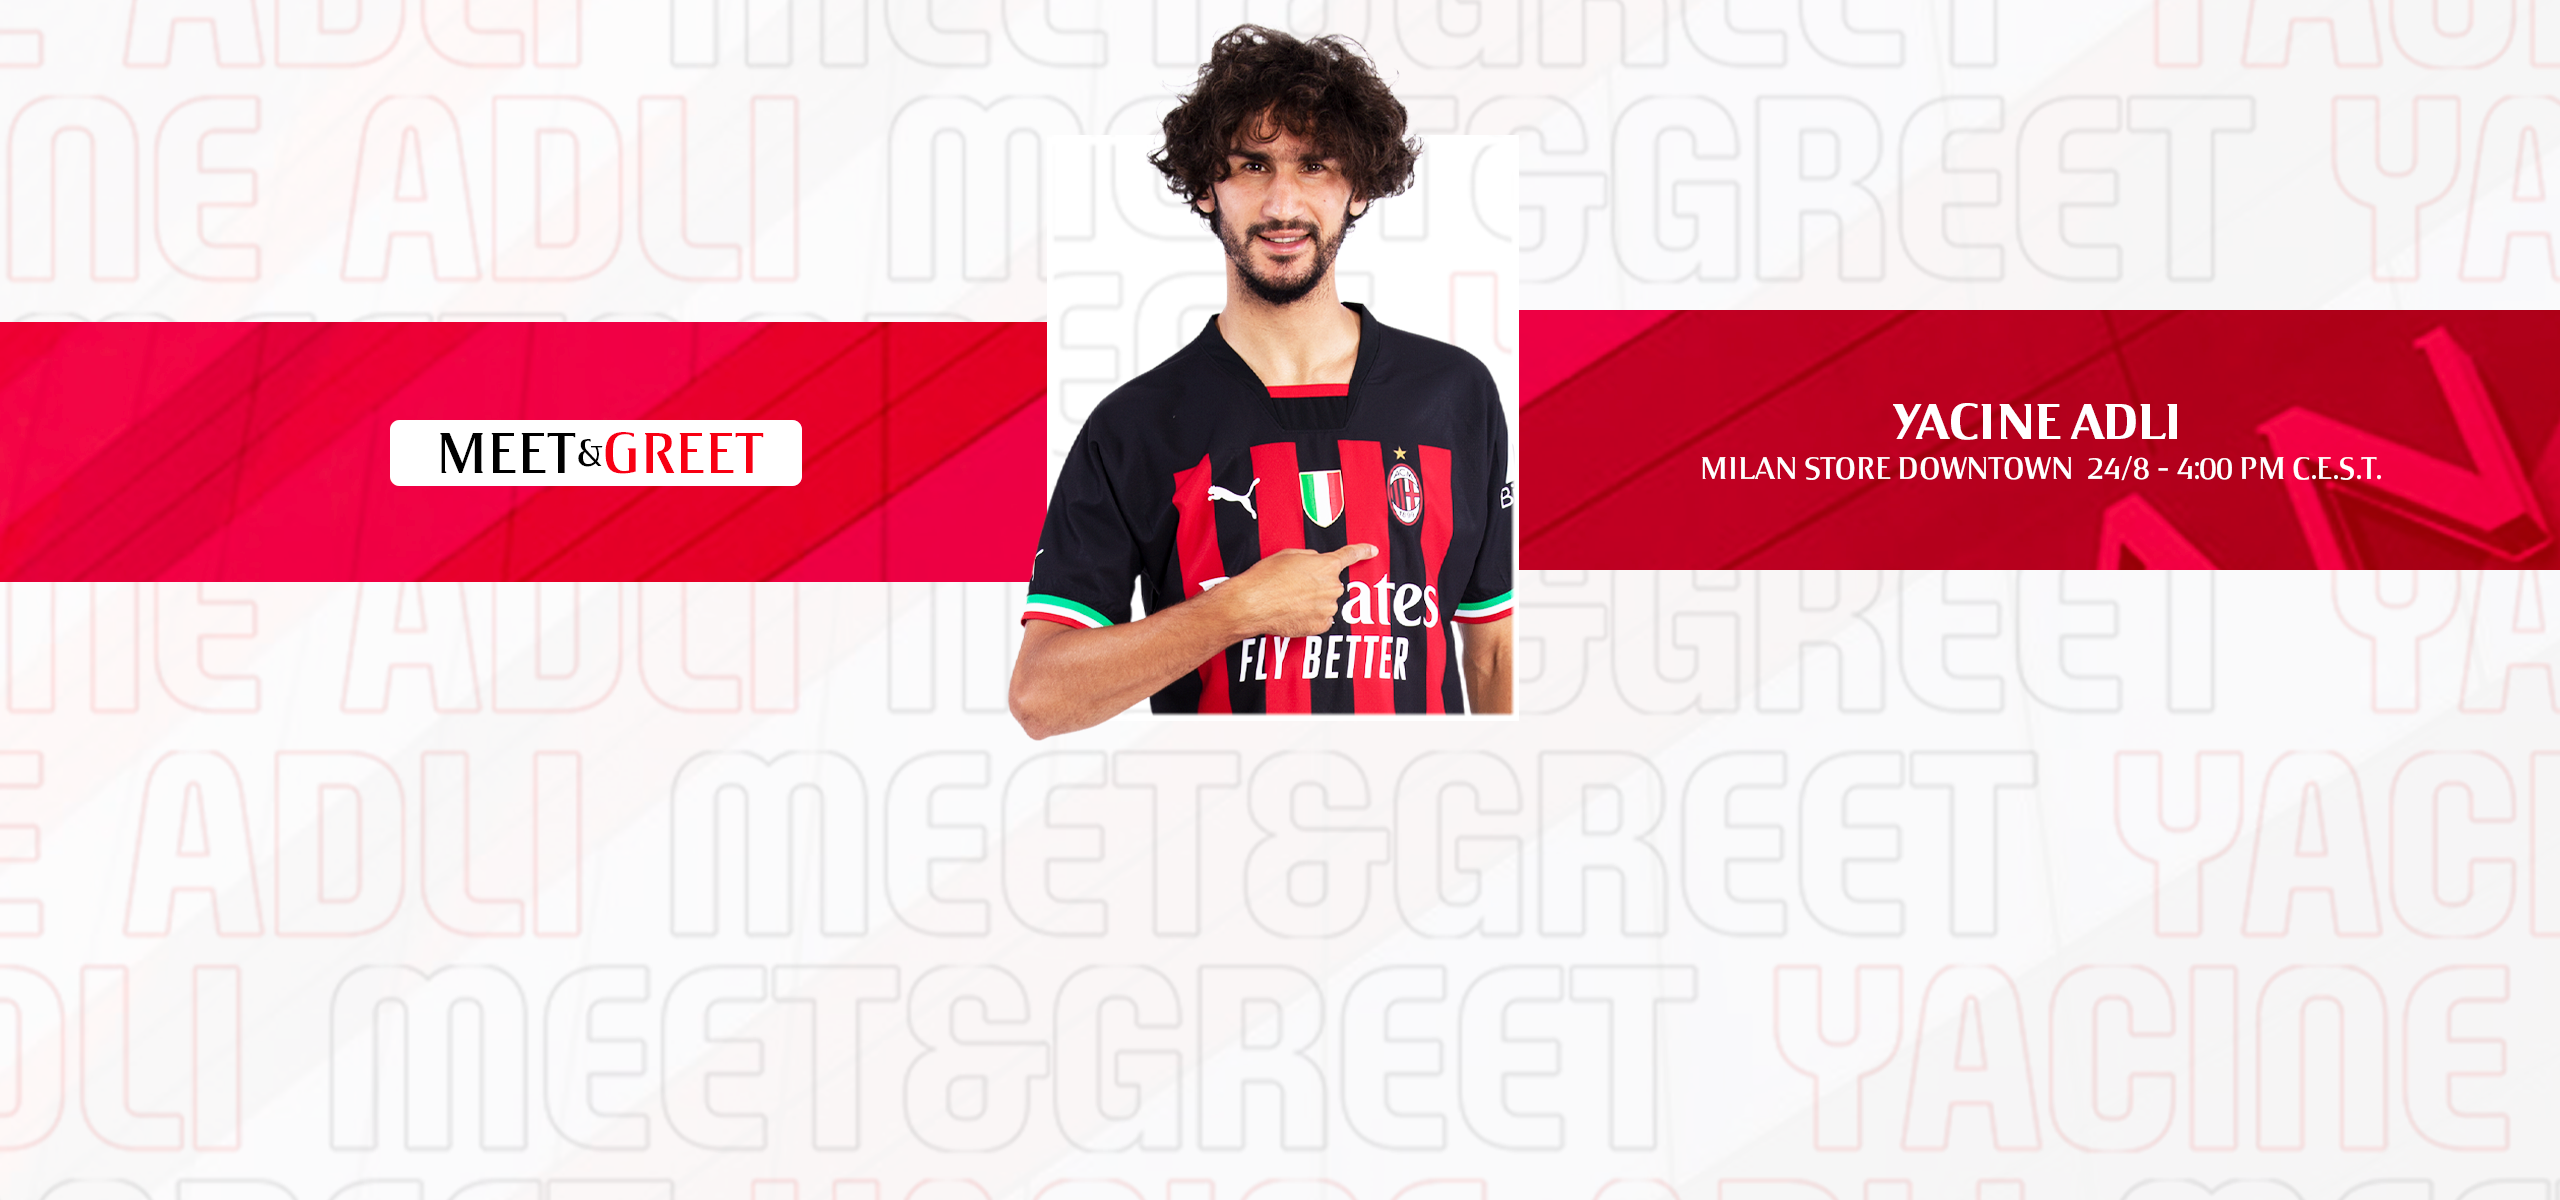 Yacine Adli meets fans at the AC Milan Store Downtown